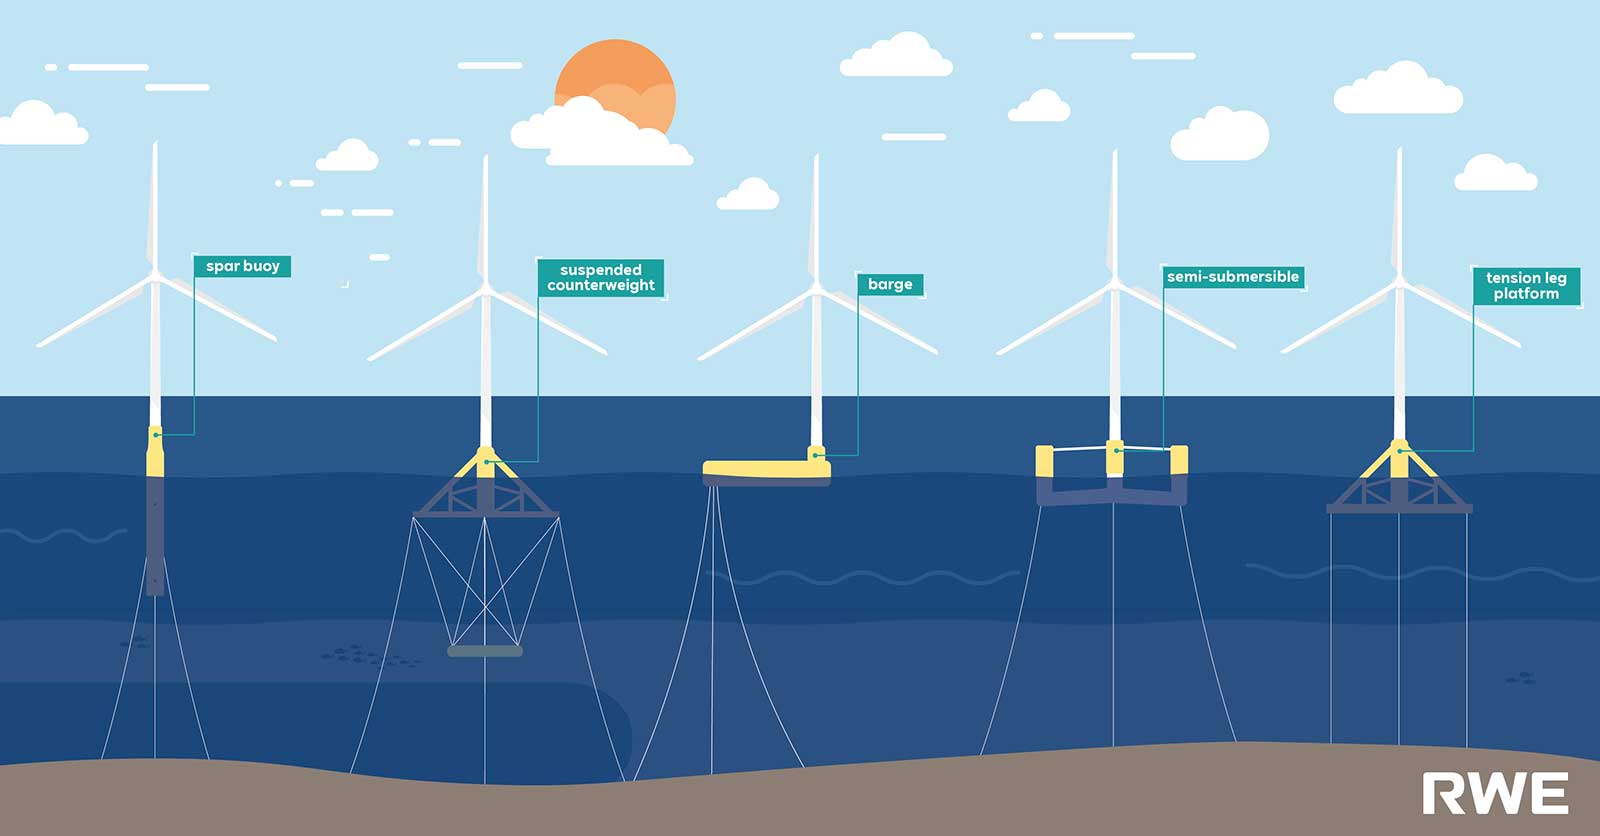 Infographic: 5 generic 'types' of floating foundation designs | RWE Floating Offshore wind